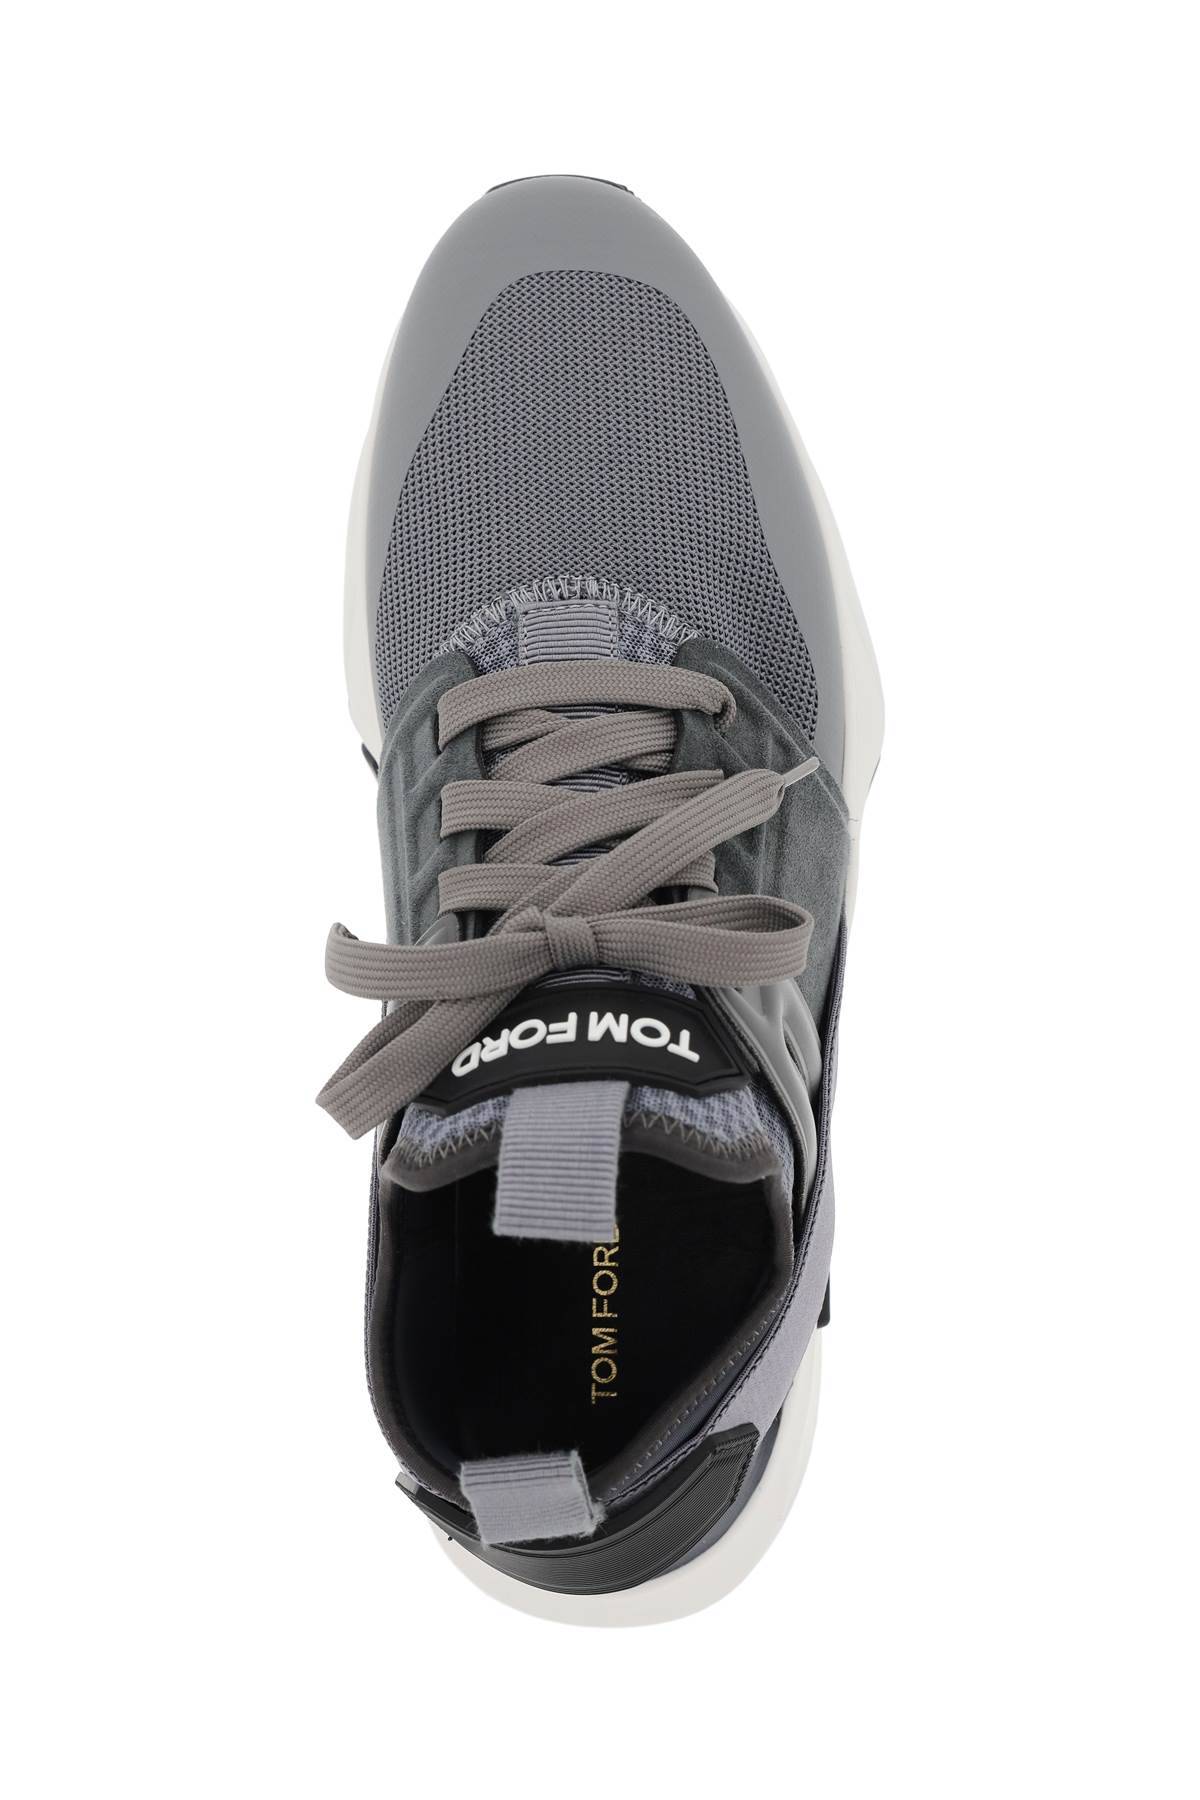 Shop Tom Ford "jago Mesh Sneakers For In Grey